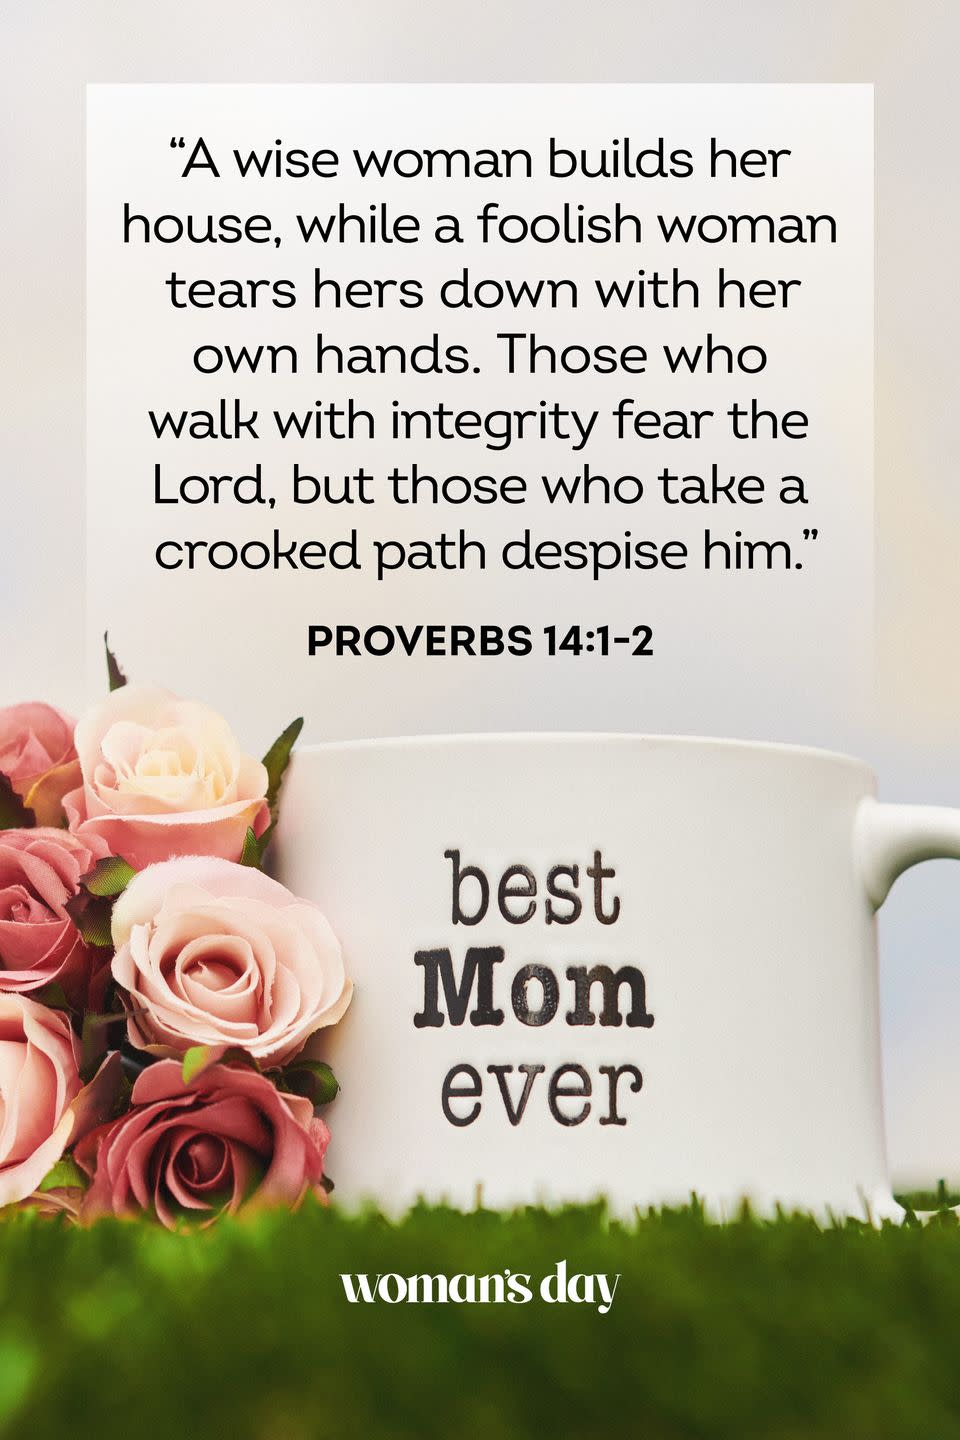 mothers day bible verses proverbs 14 1 2